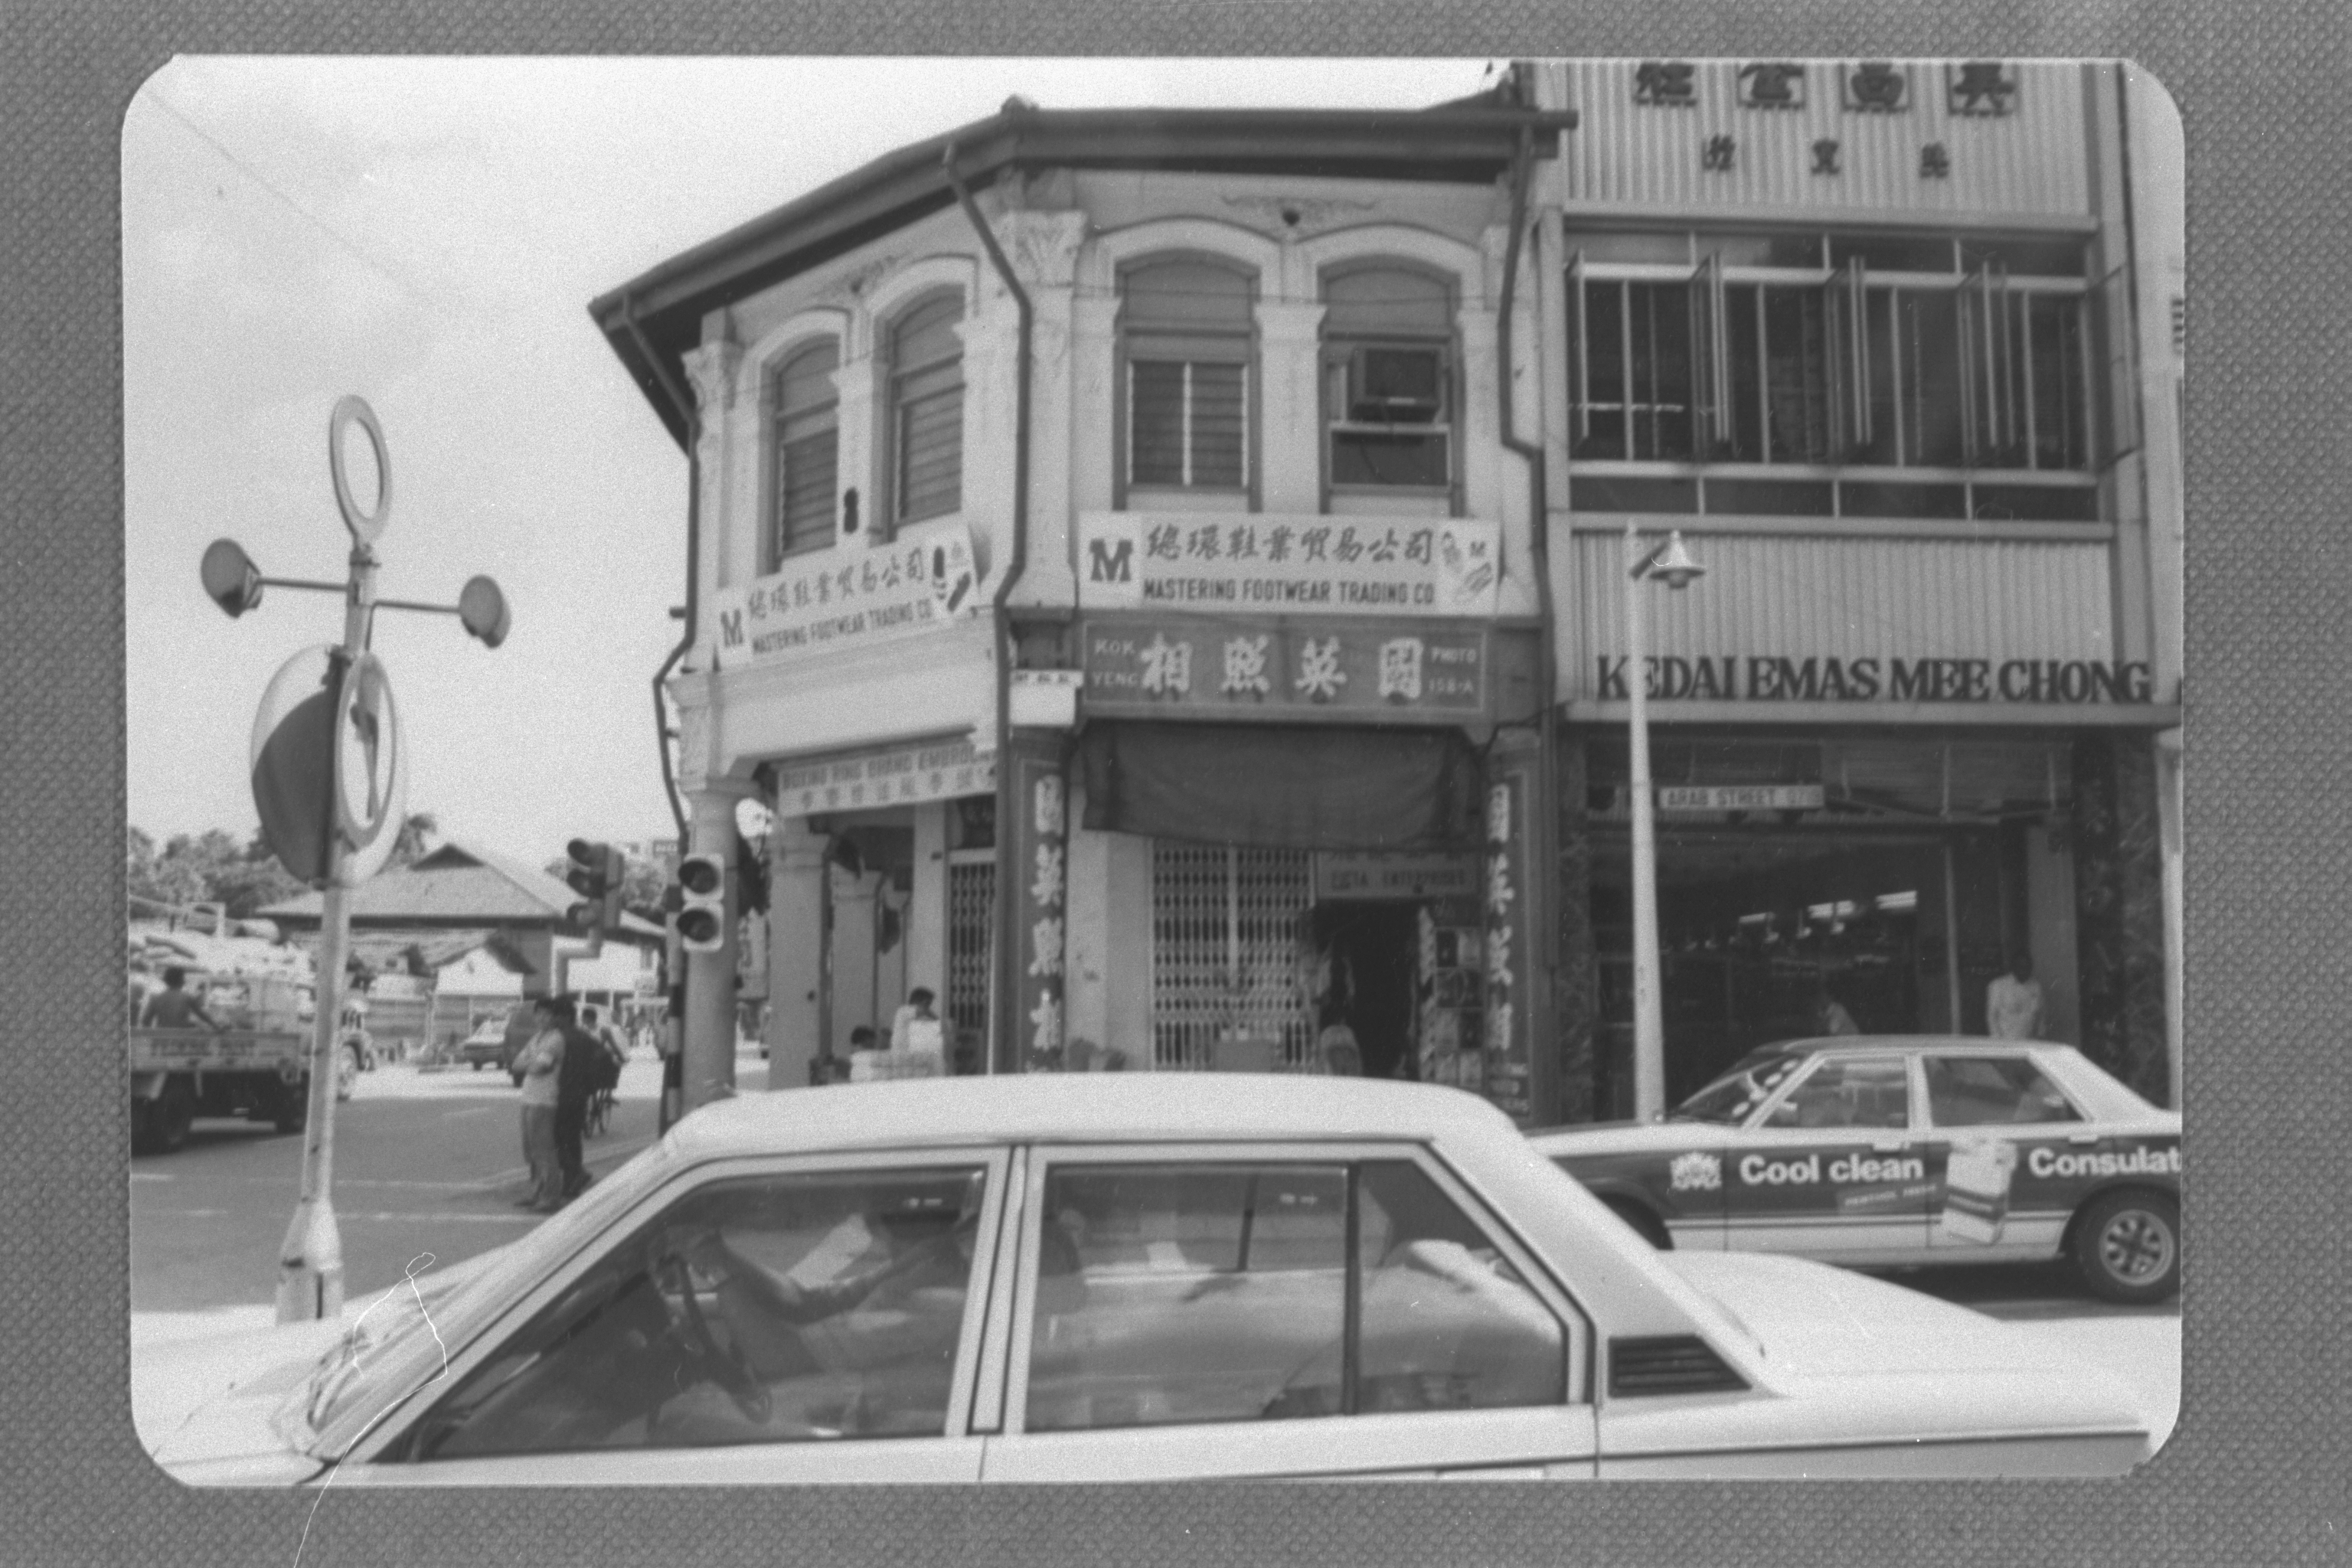 Arab Street, 1985. URA Collection, courtesy of National Archives of Singapore